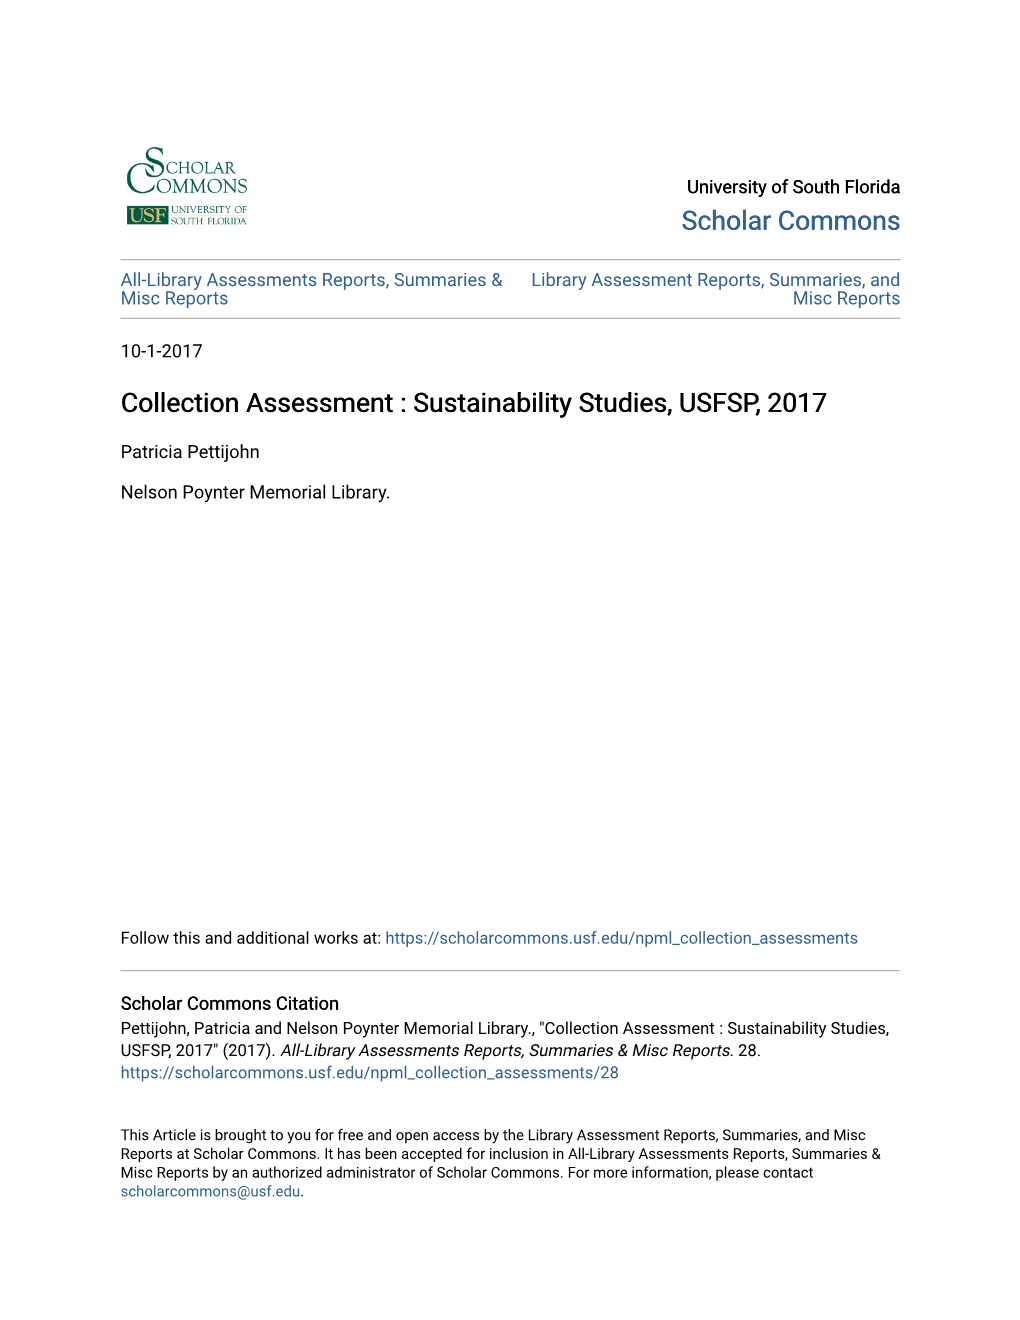 Collection Assessment : Sustainability Studies, USFSP, 2017